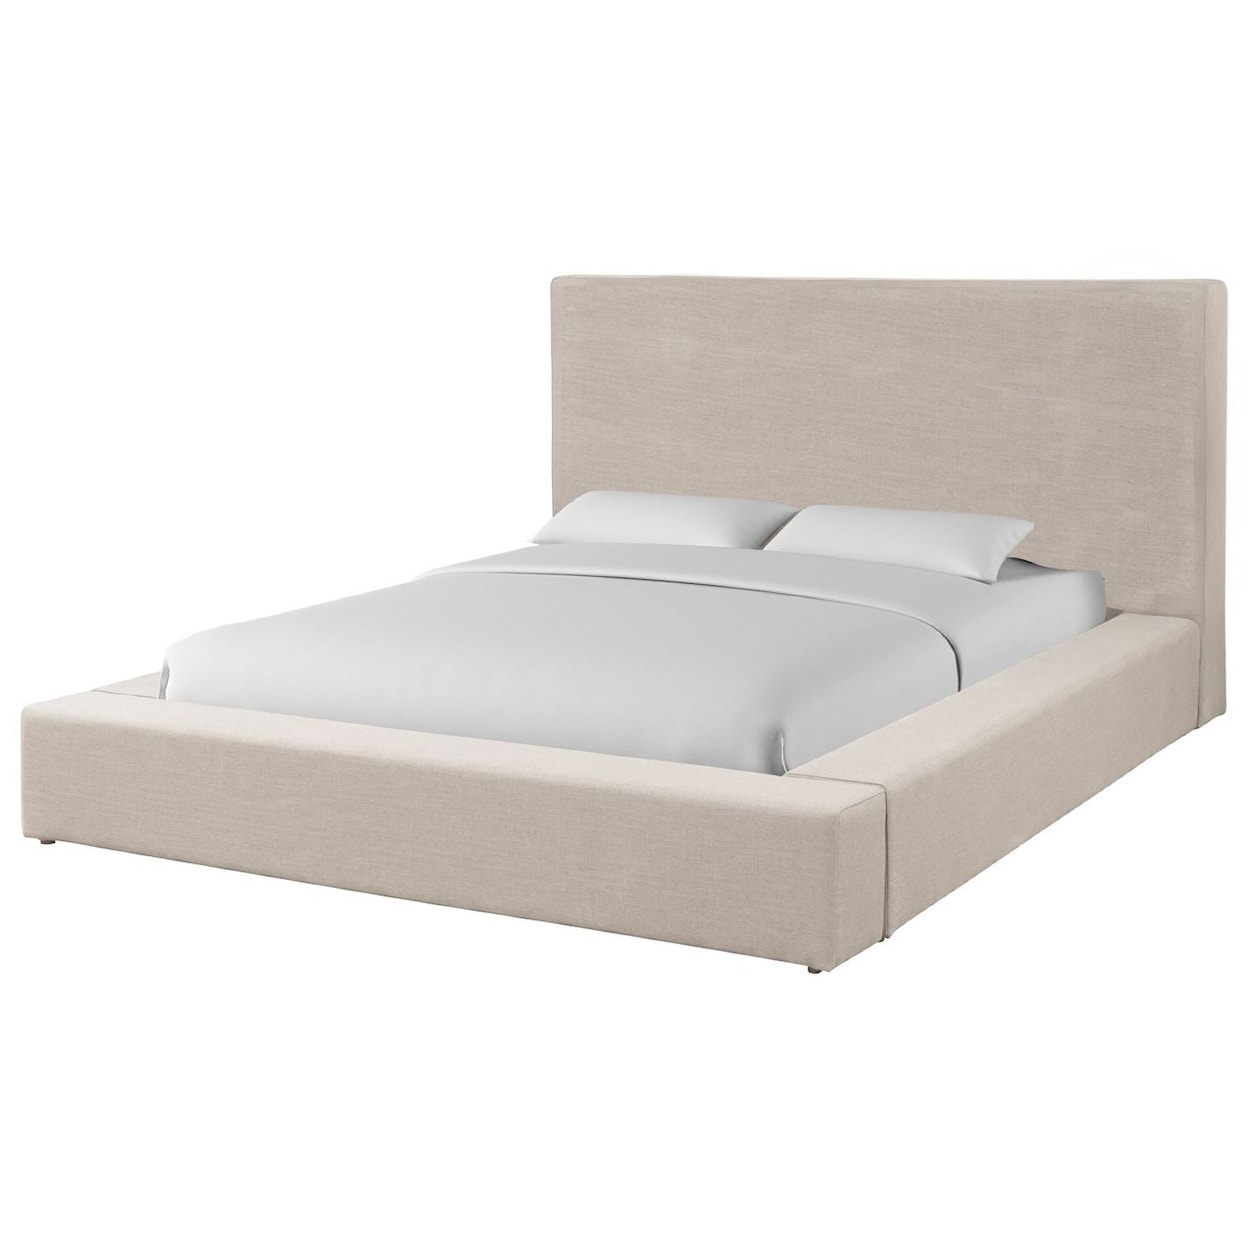 Paramount Living Heavenly King Upholstered Bed